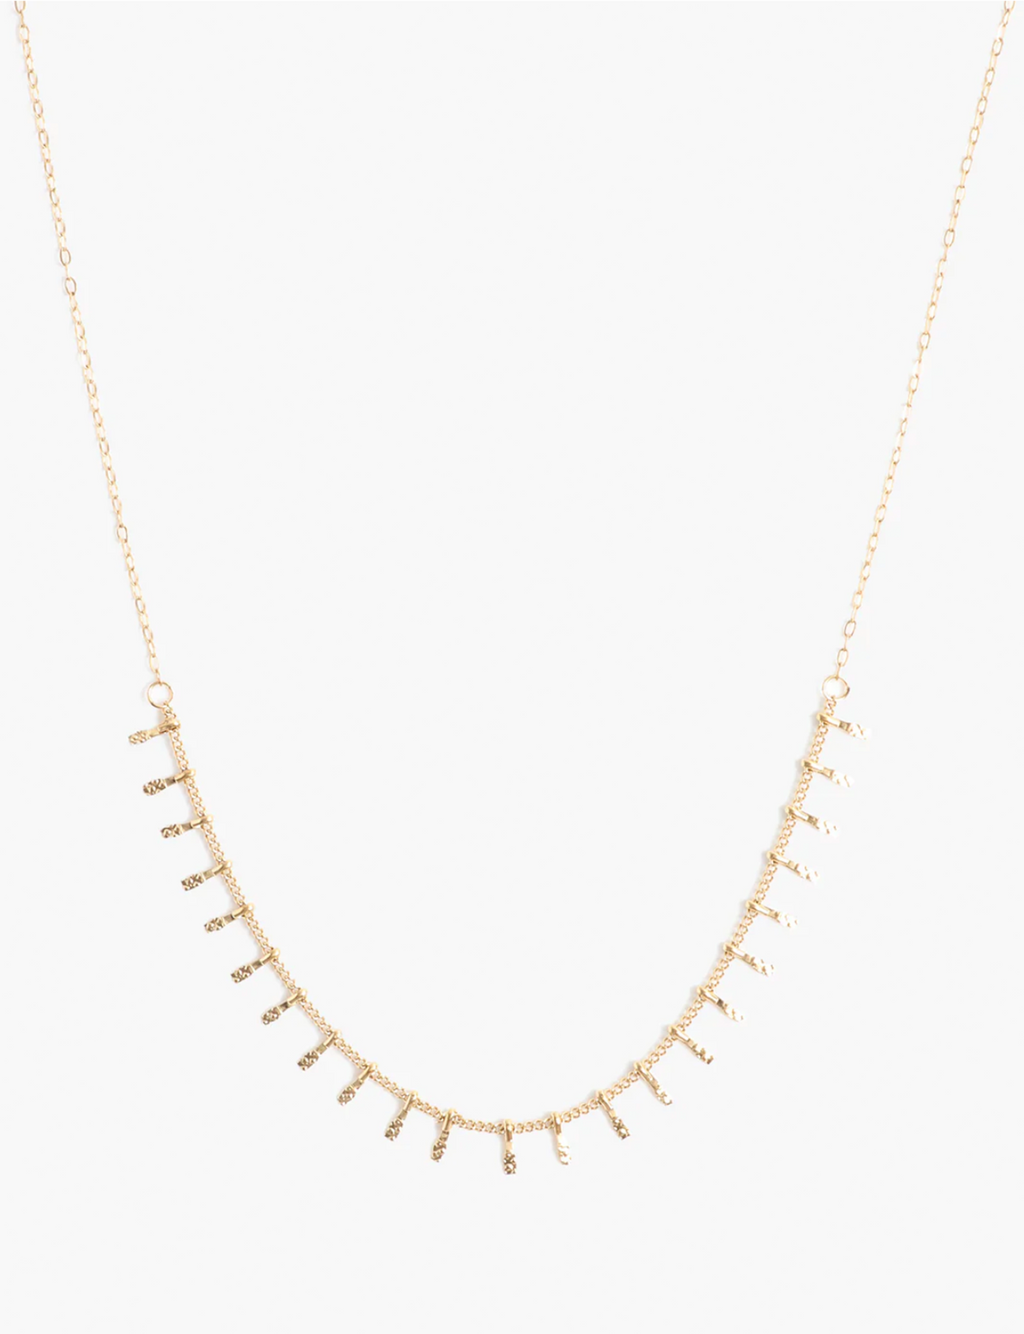 Sima Shaker Necklace, Gold